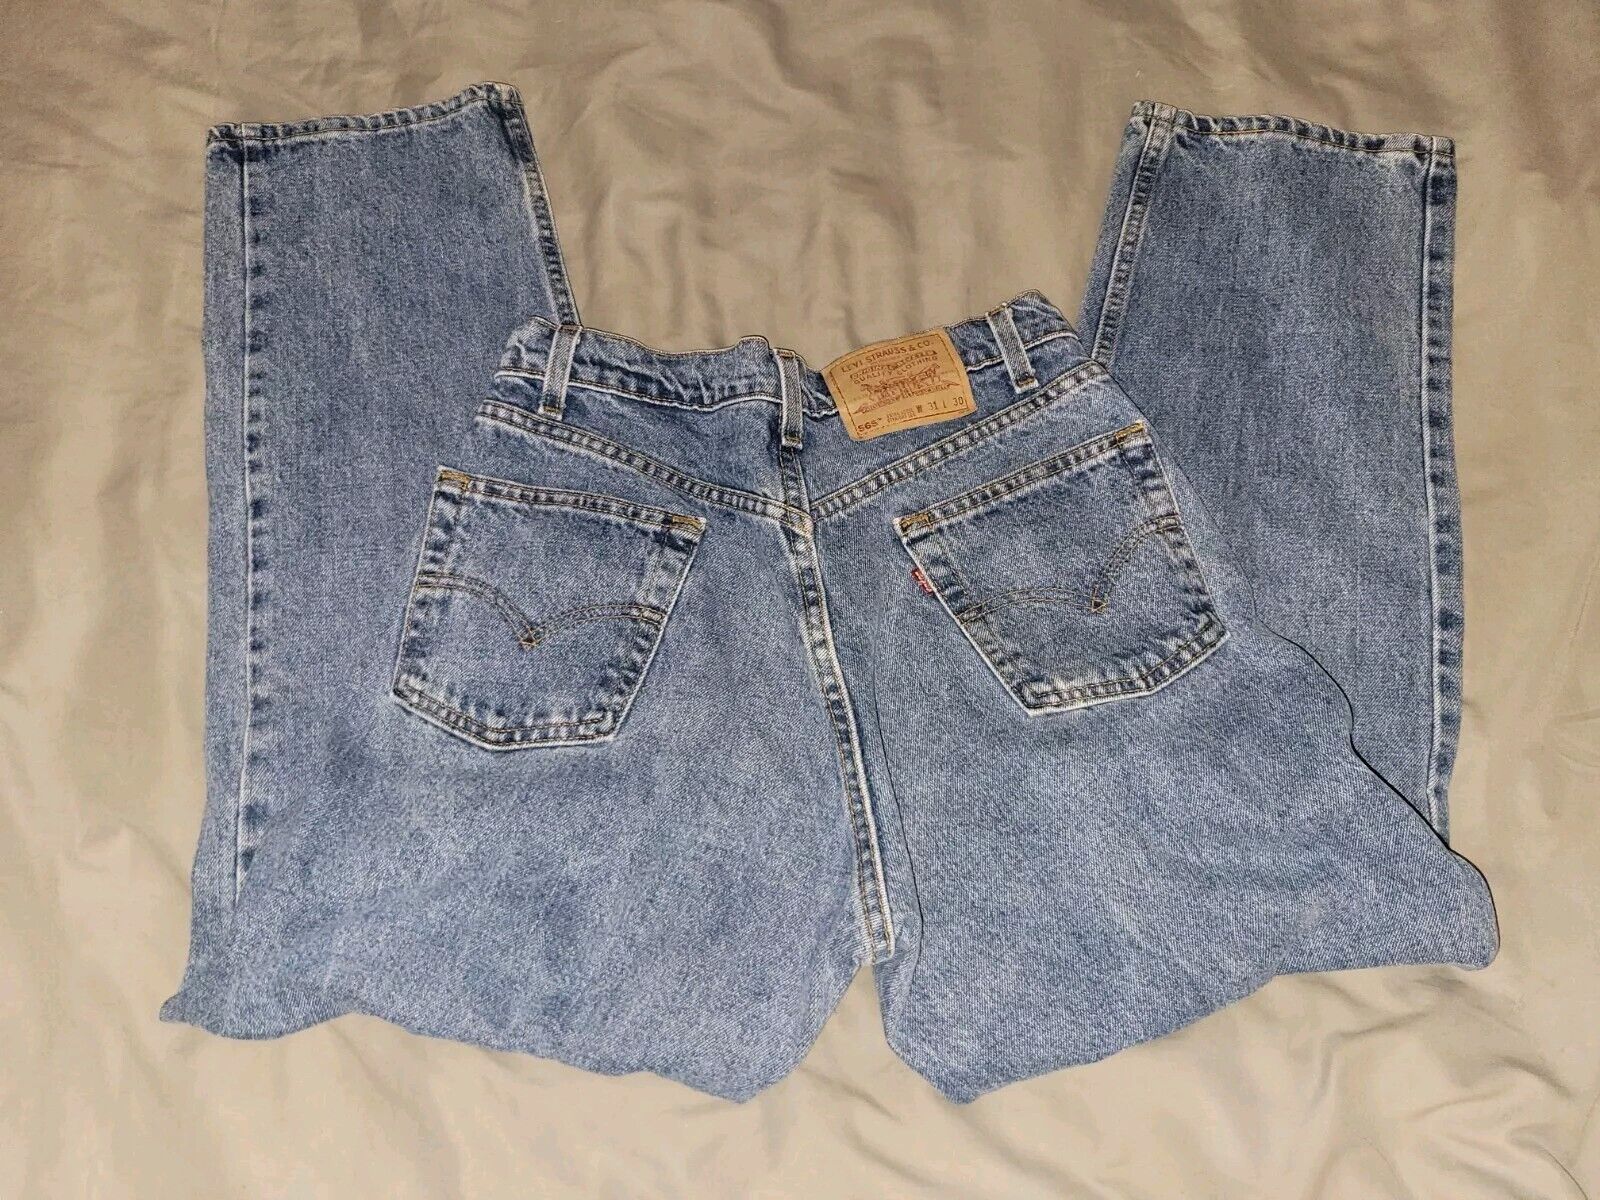 Vintage 90s Levis 565 Extra Loose Straight Jeans Sz 31x30 Made Is USA